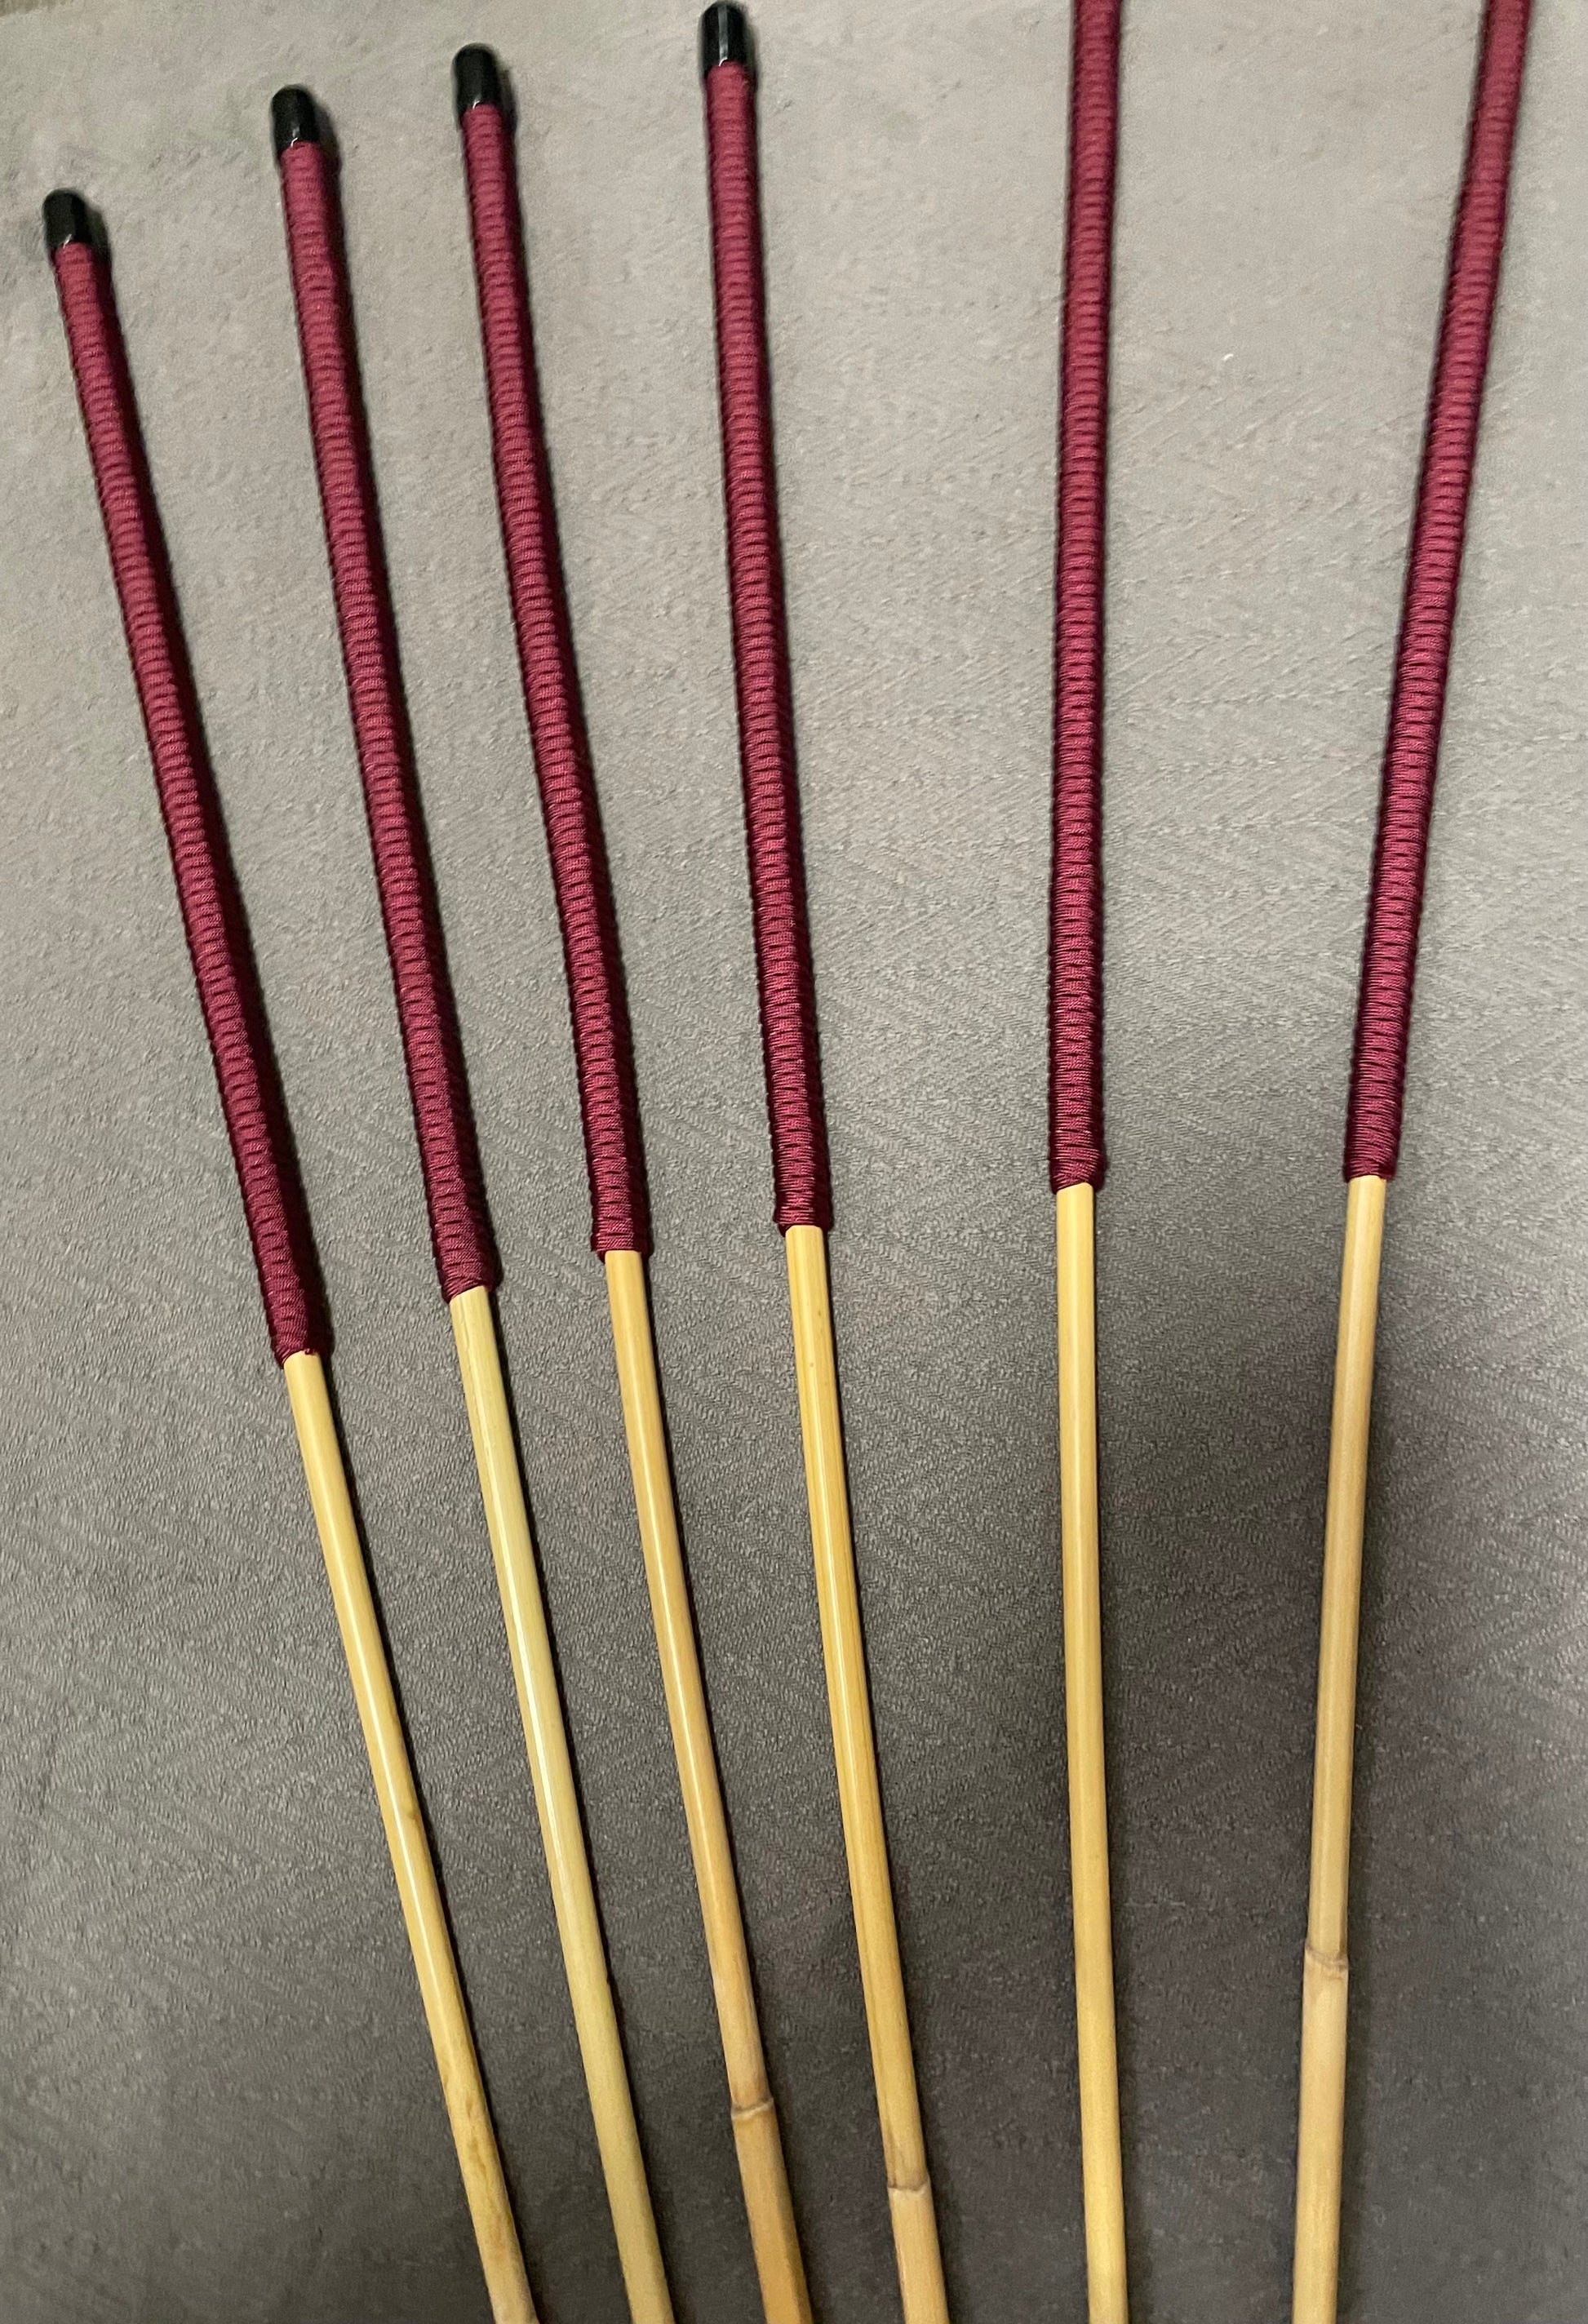 Thick and Thuddy Classic Dragon Canes / Whipping Canes / BDSM Canes Set of 6  - 110 cms Length - Burgundy Paracord Handles - Englishvice Canes